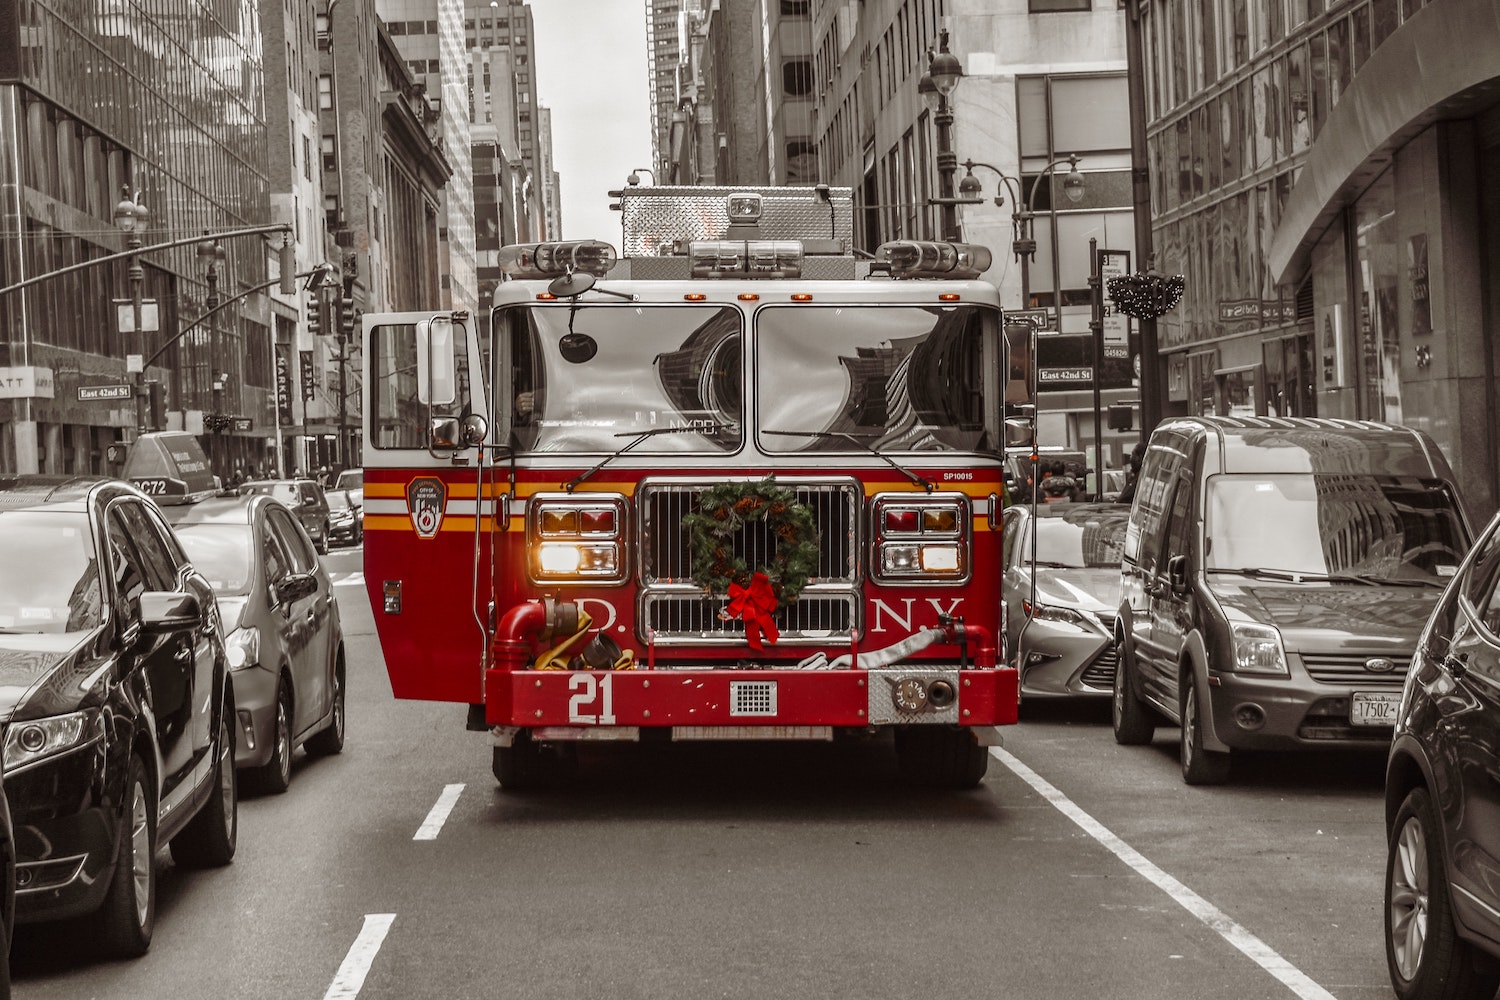 A fire truck parked between rows of cars and buildings on the streets of New York.